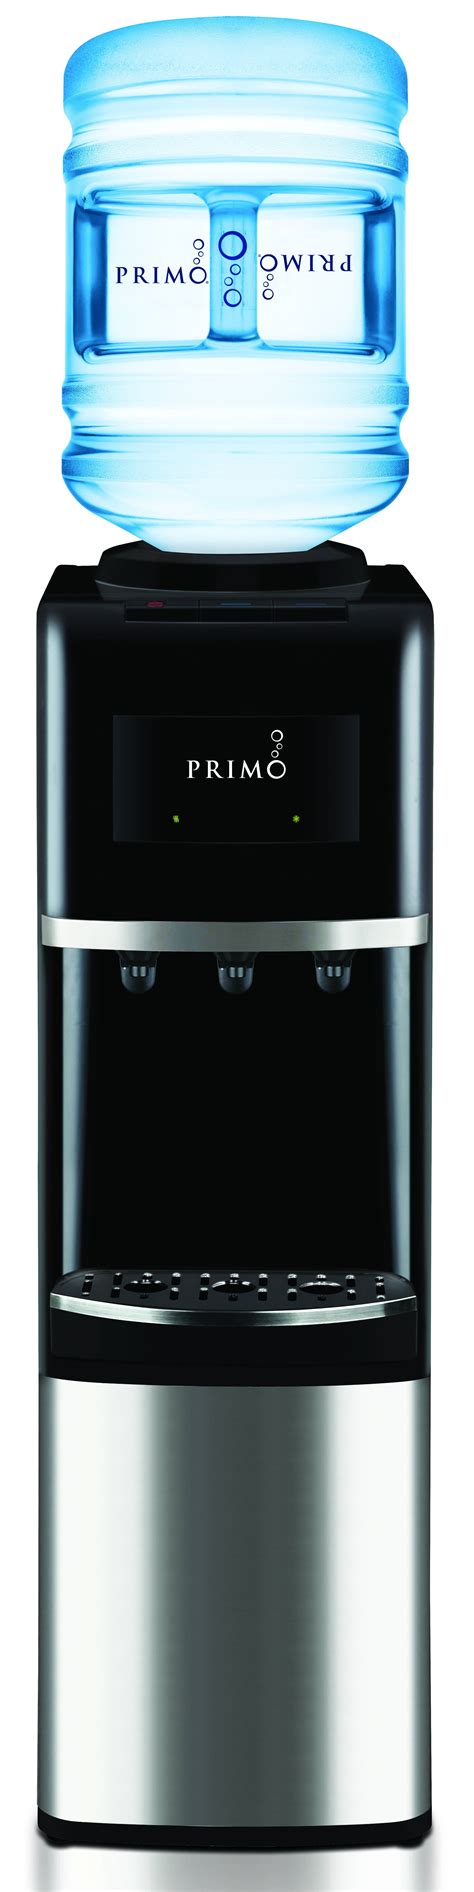 Primo Water Dispenser Top Loading Hotcoldroom Temperature Stainless